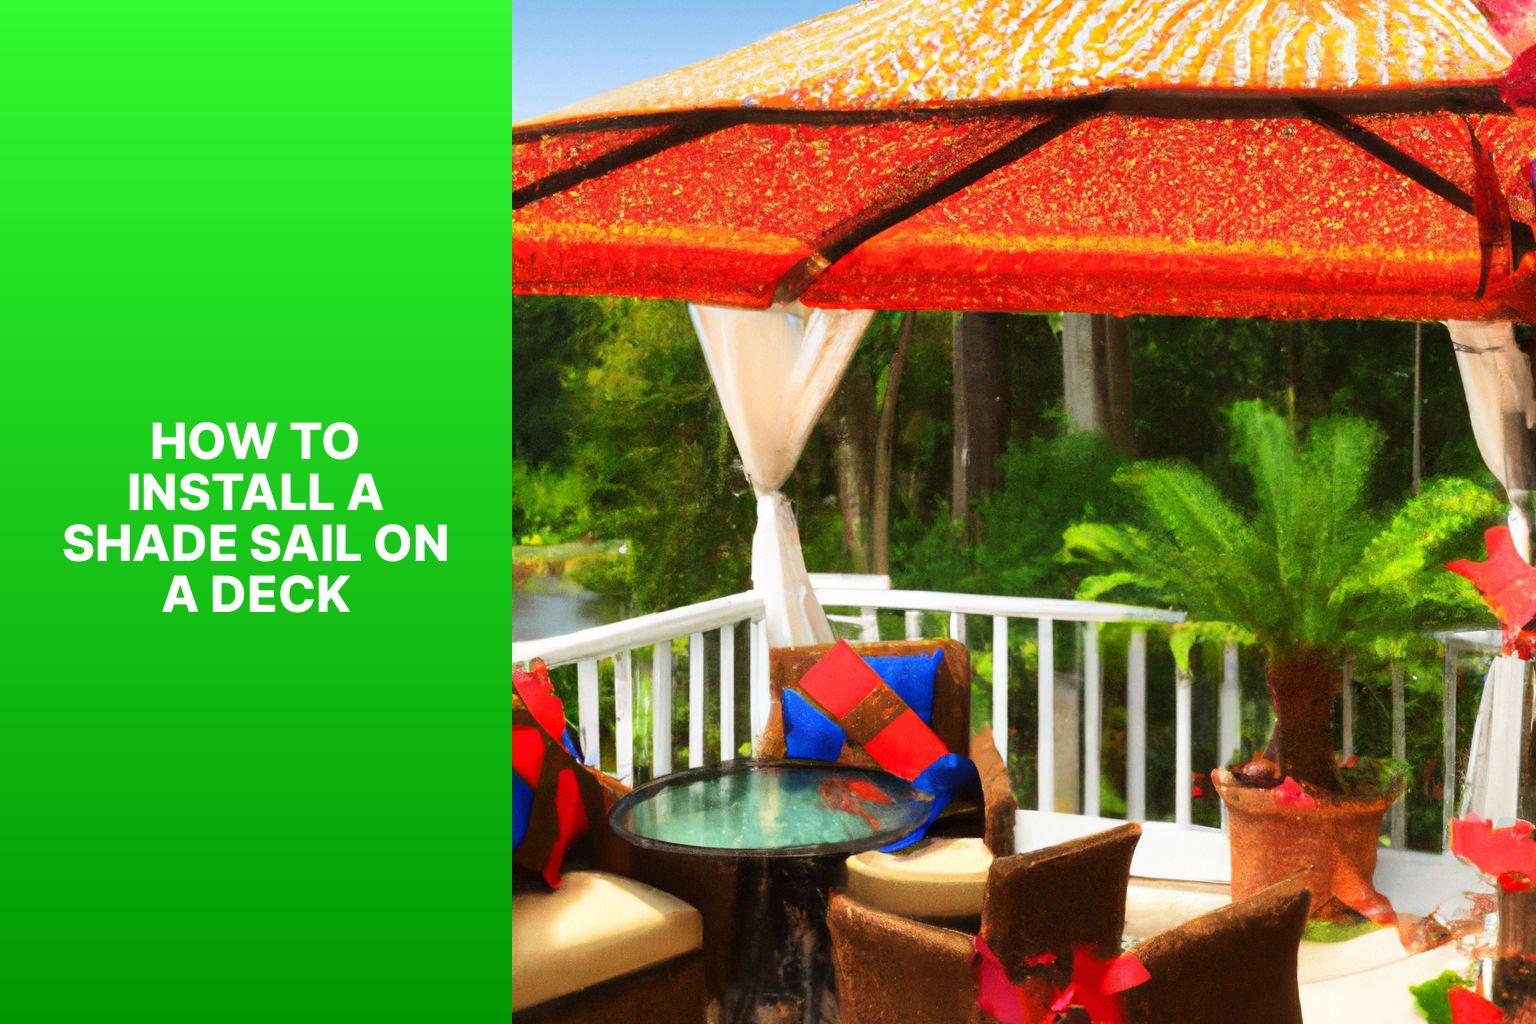 Easy Steps to Install a Shade Sail on Your Deck – Complete Guide